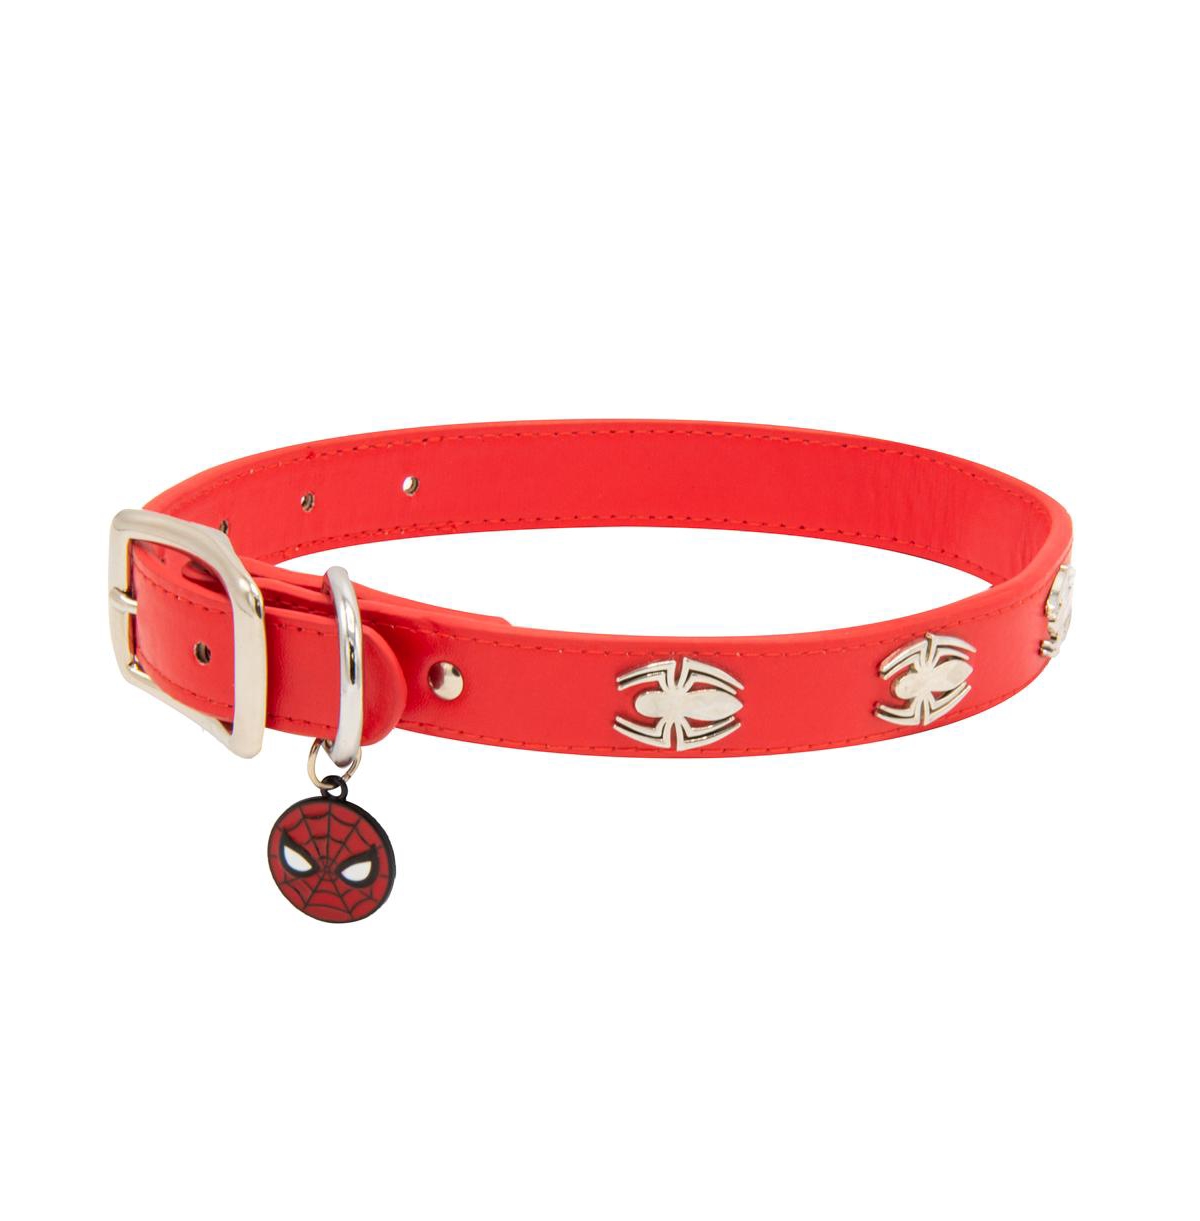 Dc Comics Pet Collar, Faux Leather Dog Collar, Spider Man - Red